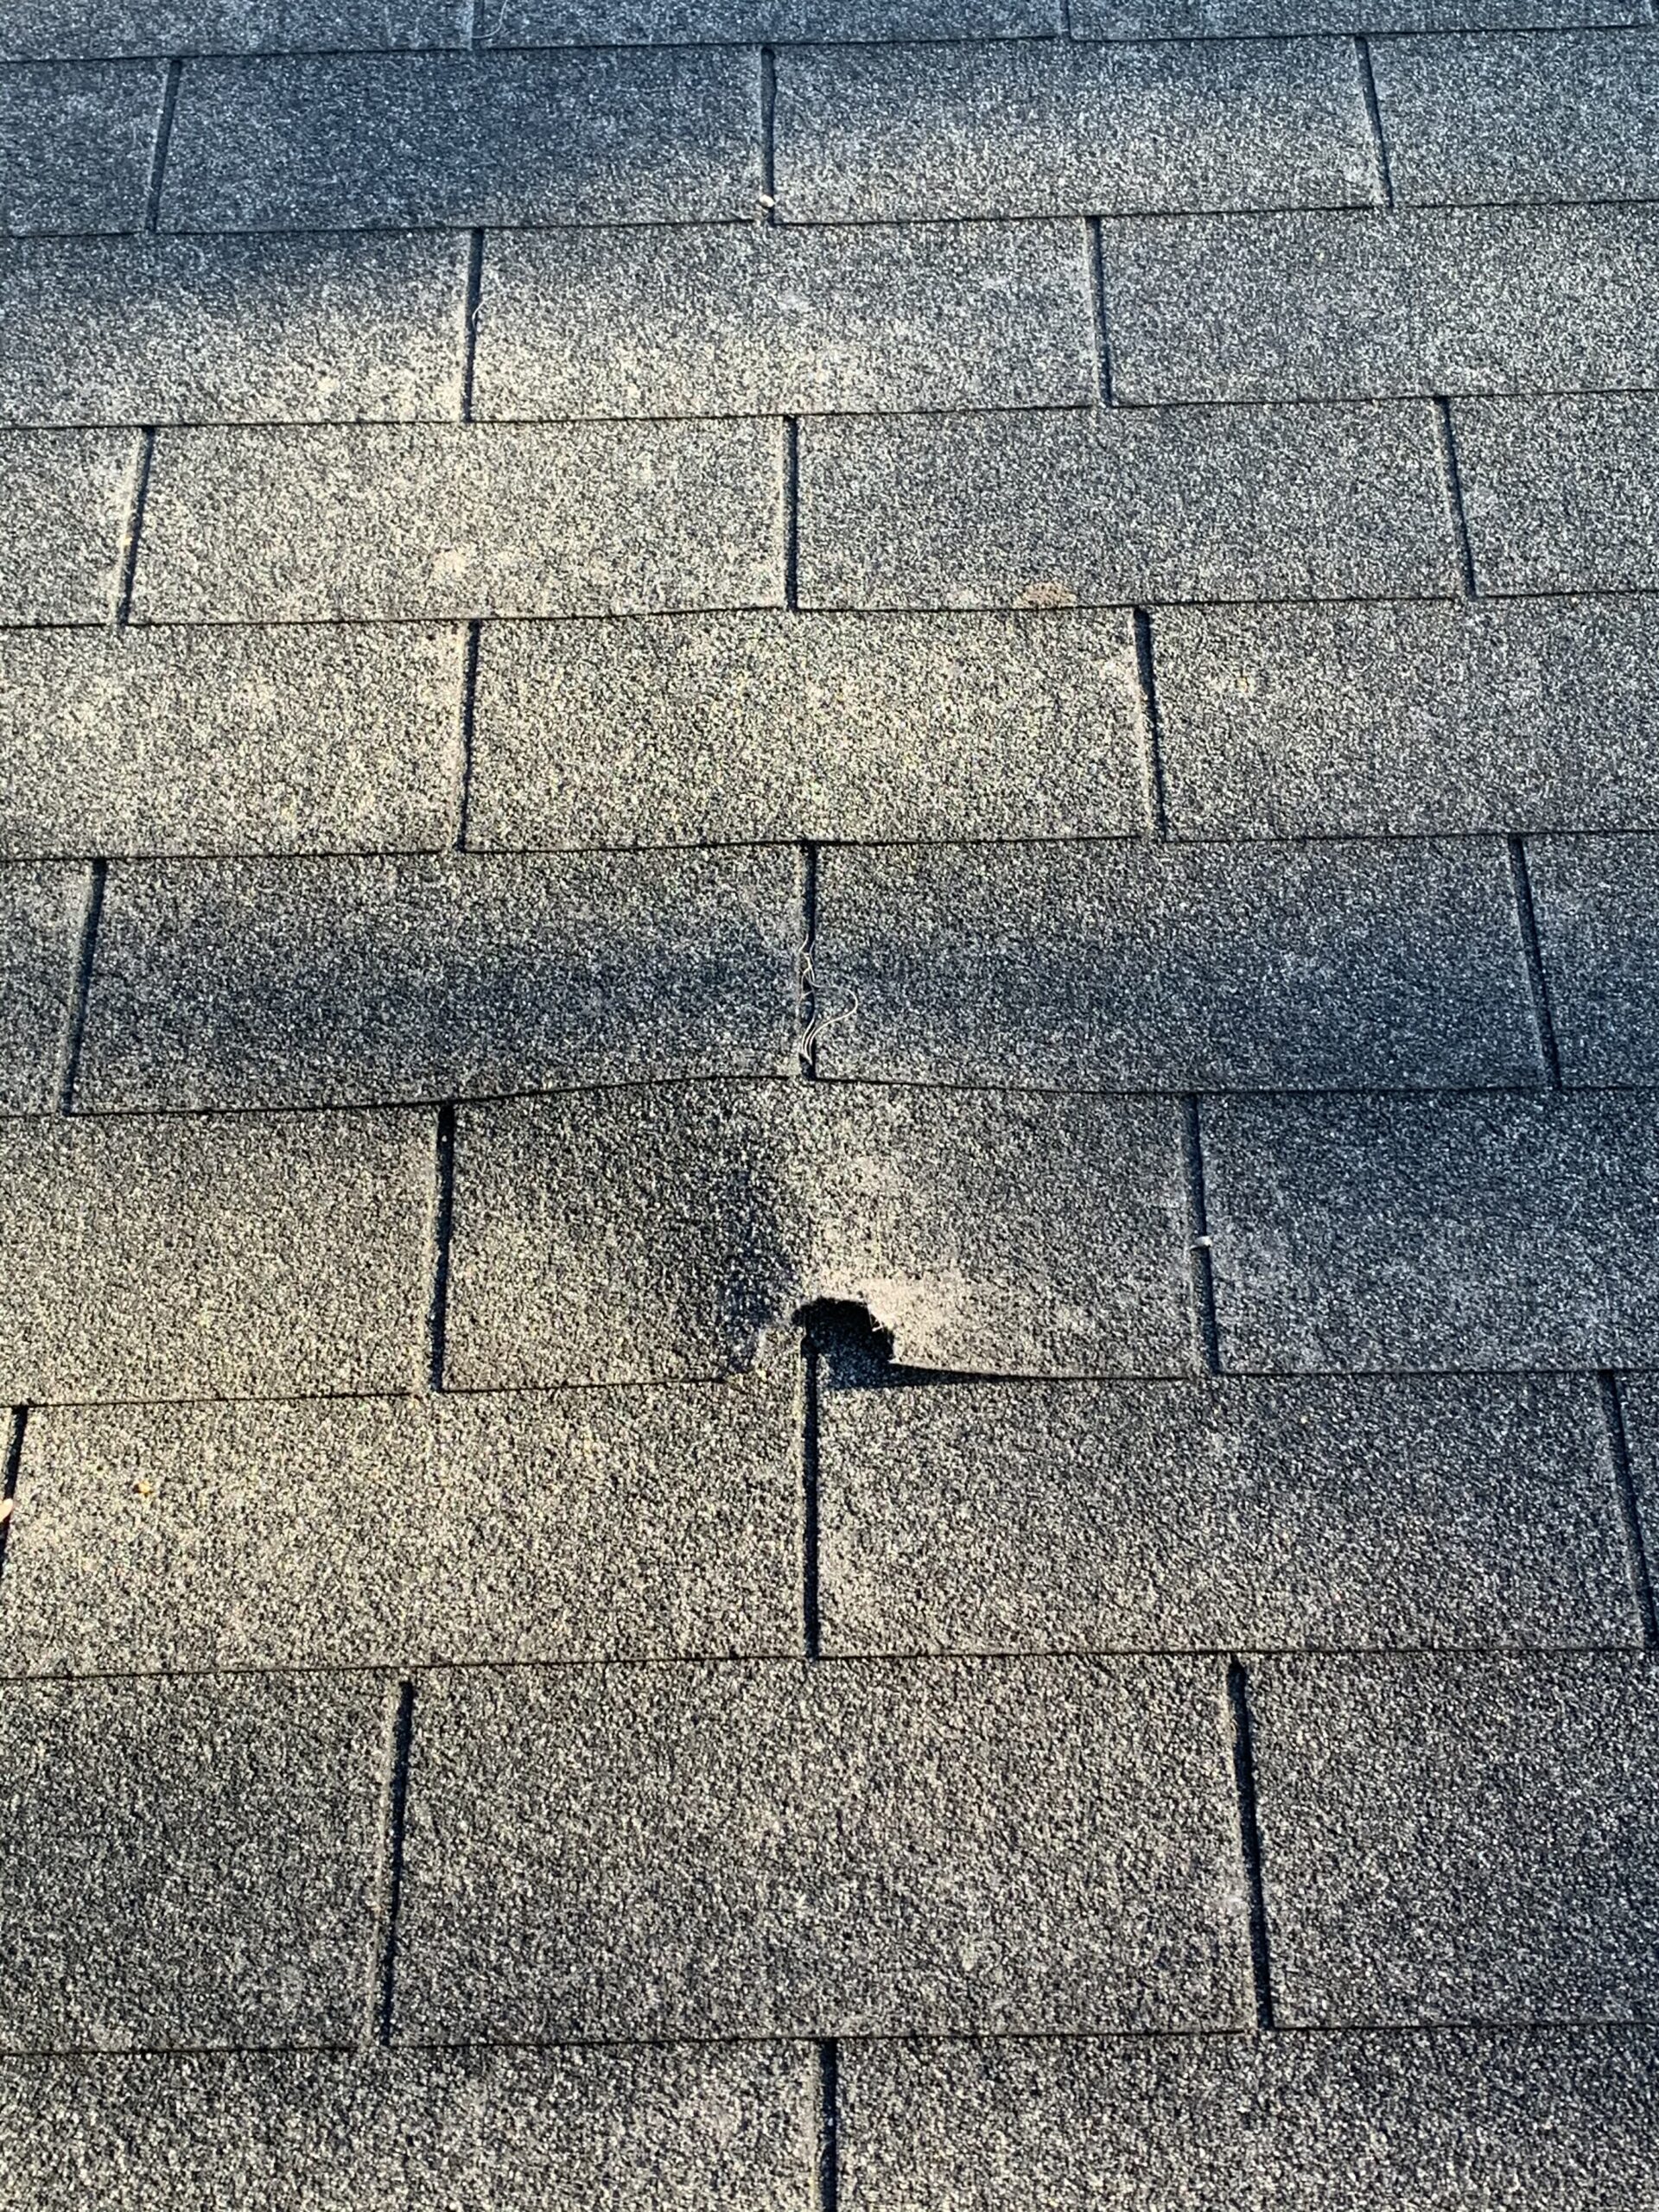 Damaged shingles on residential roof